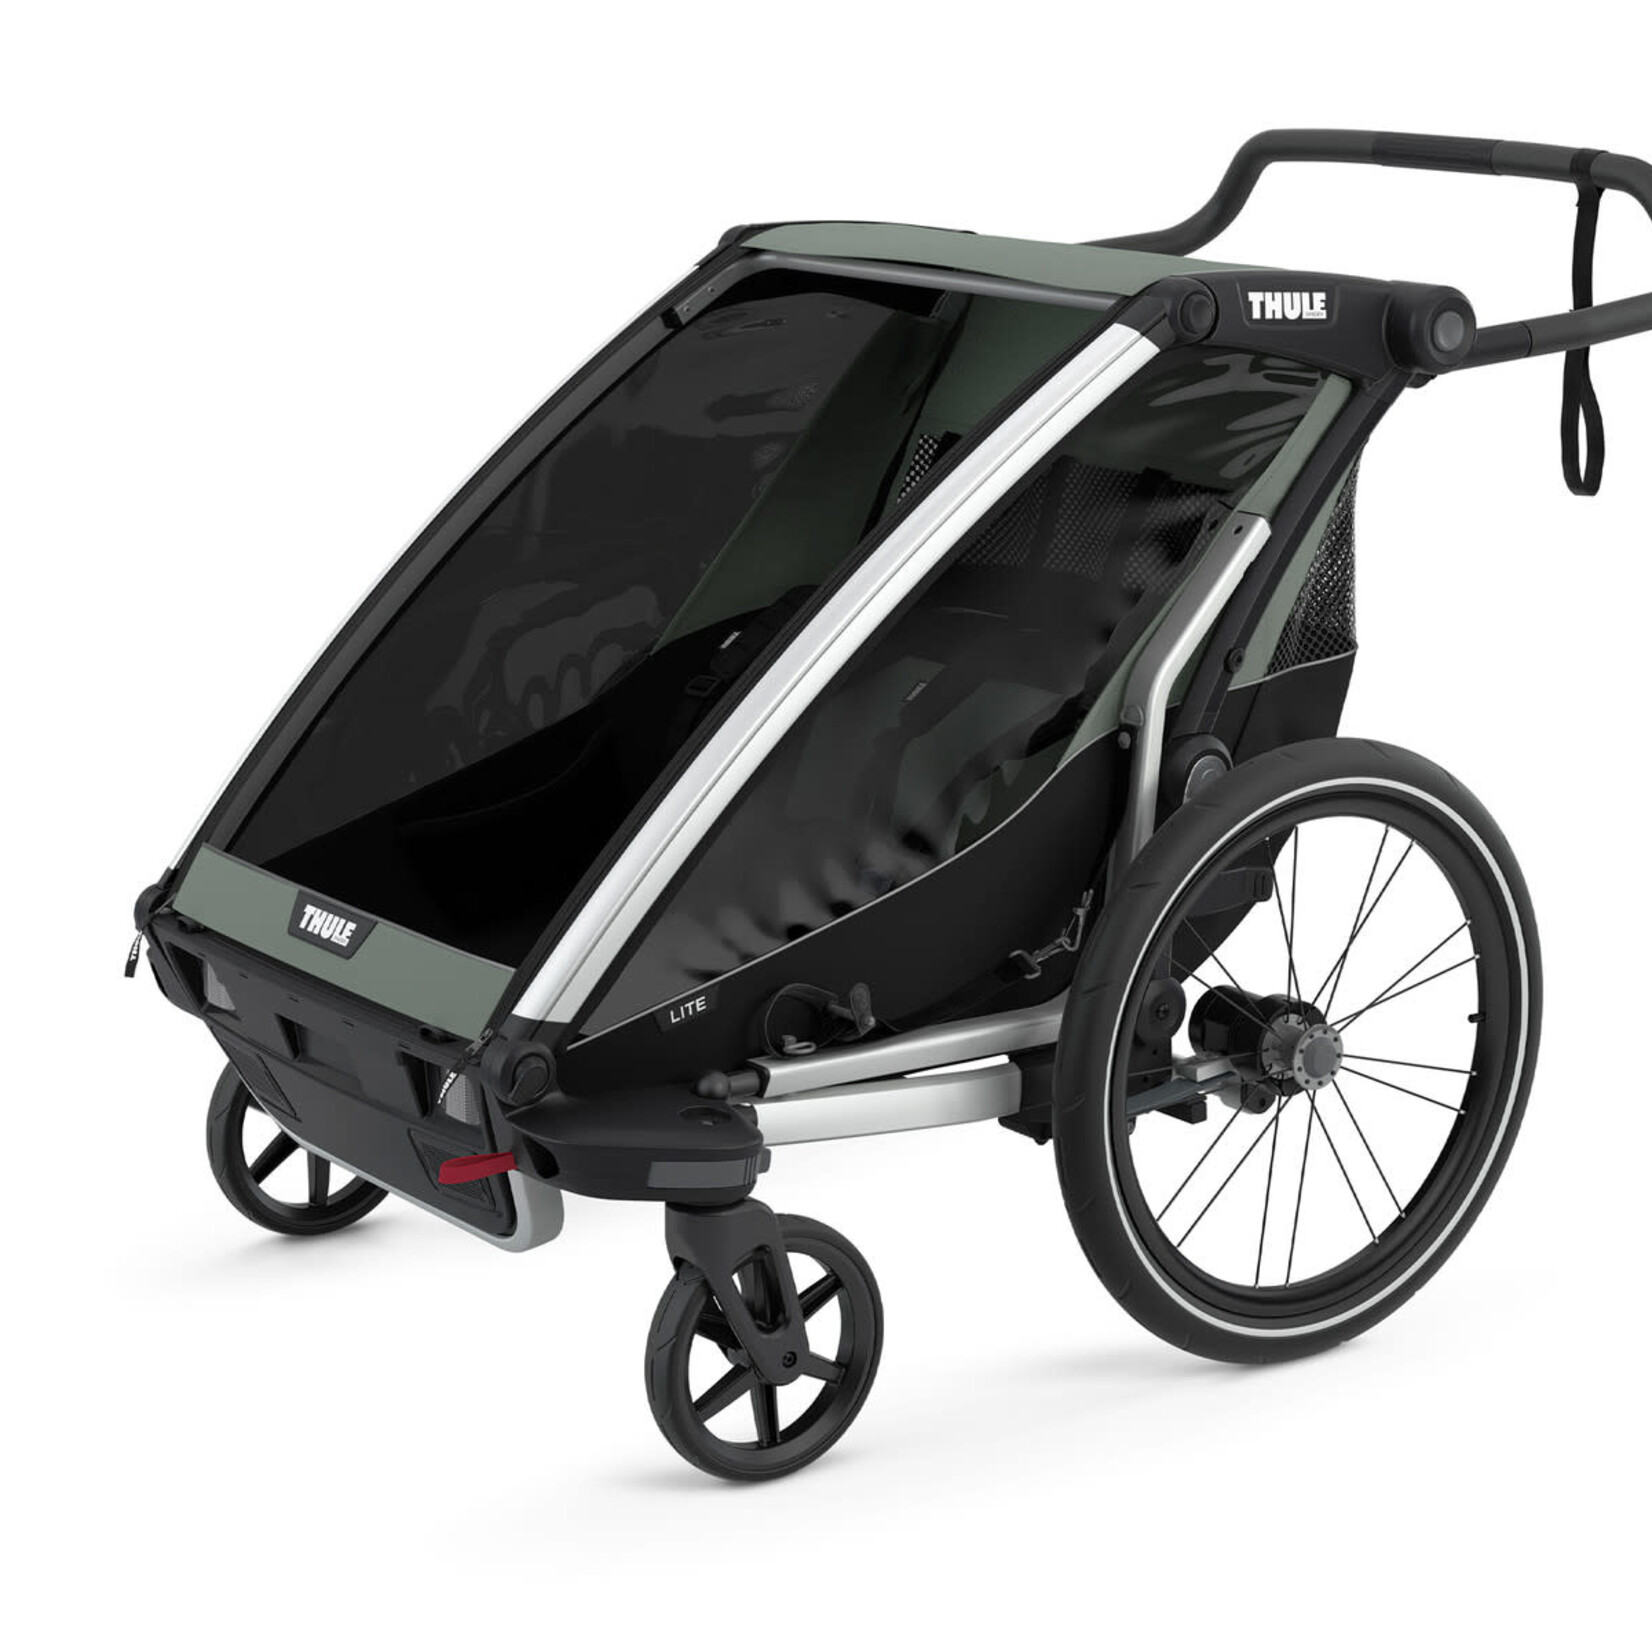 Thule Thule Child Carrier, Chariot Lite 2, Agave